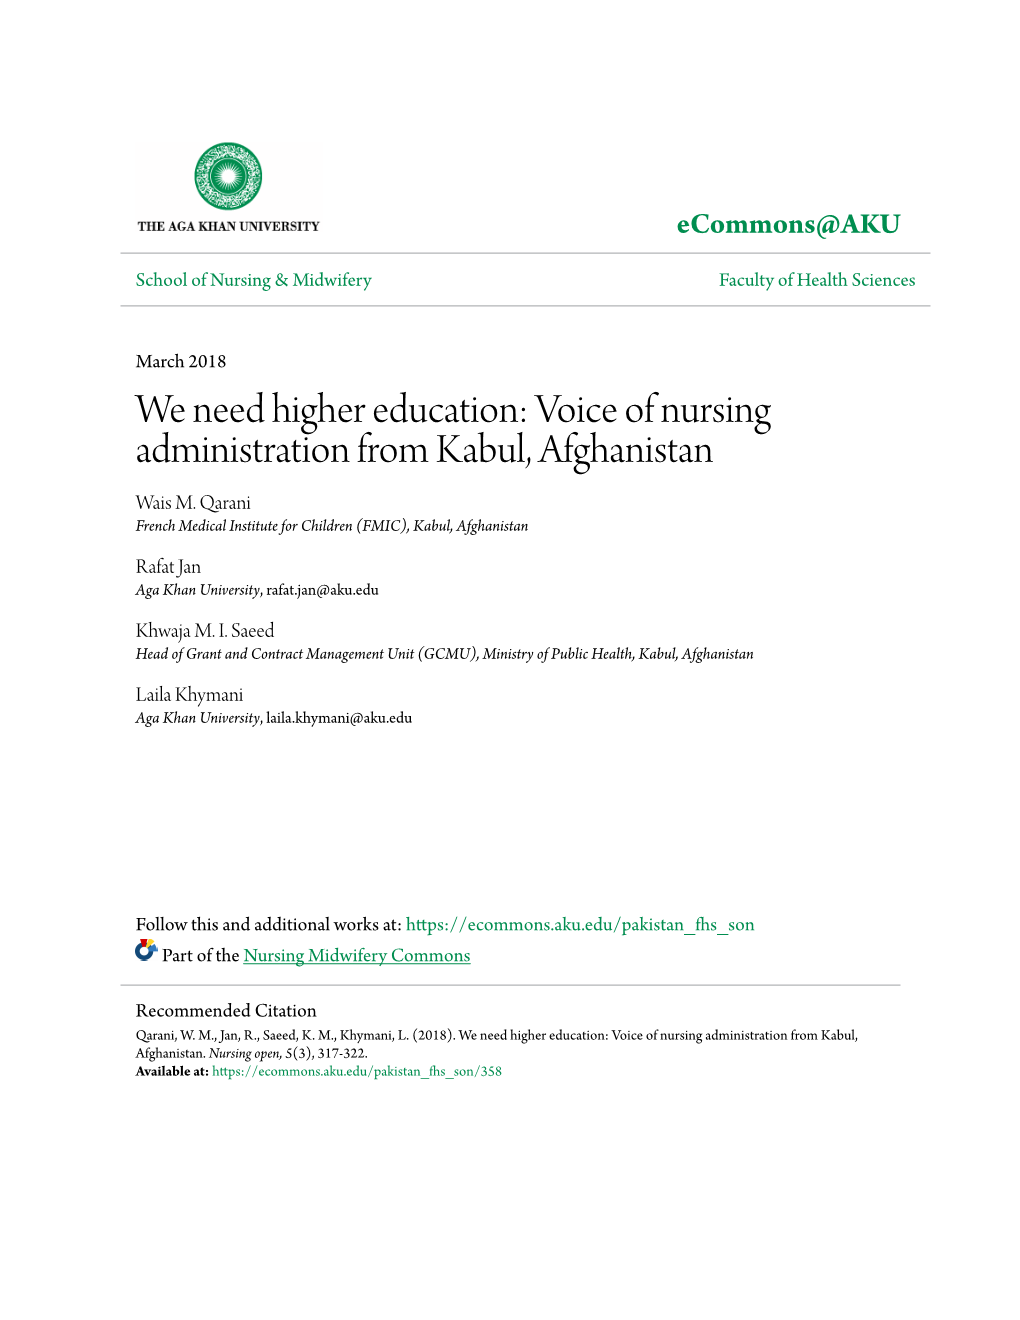 Voice of Nursing Administration from Kabul, Afghanistan Wais M